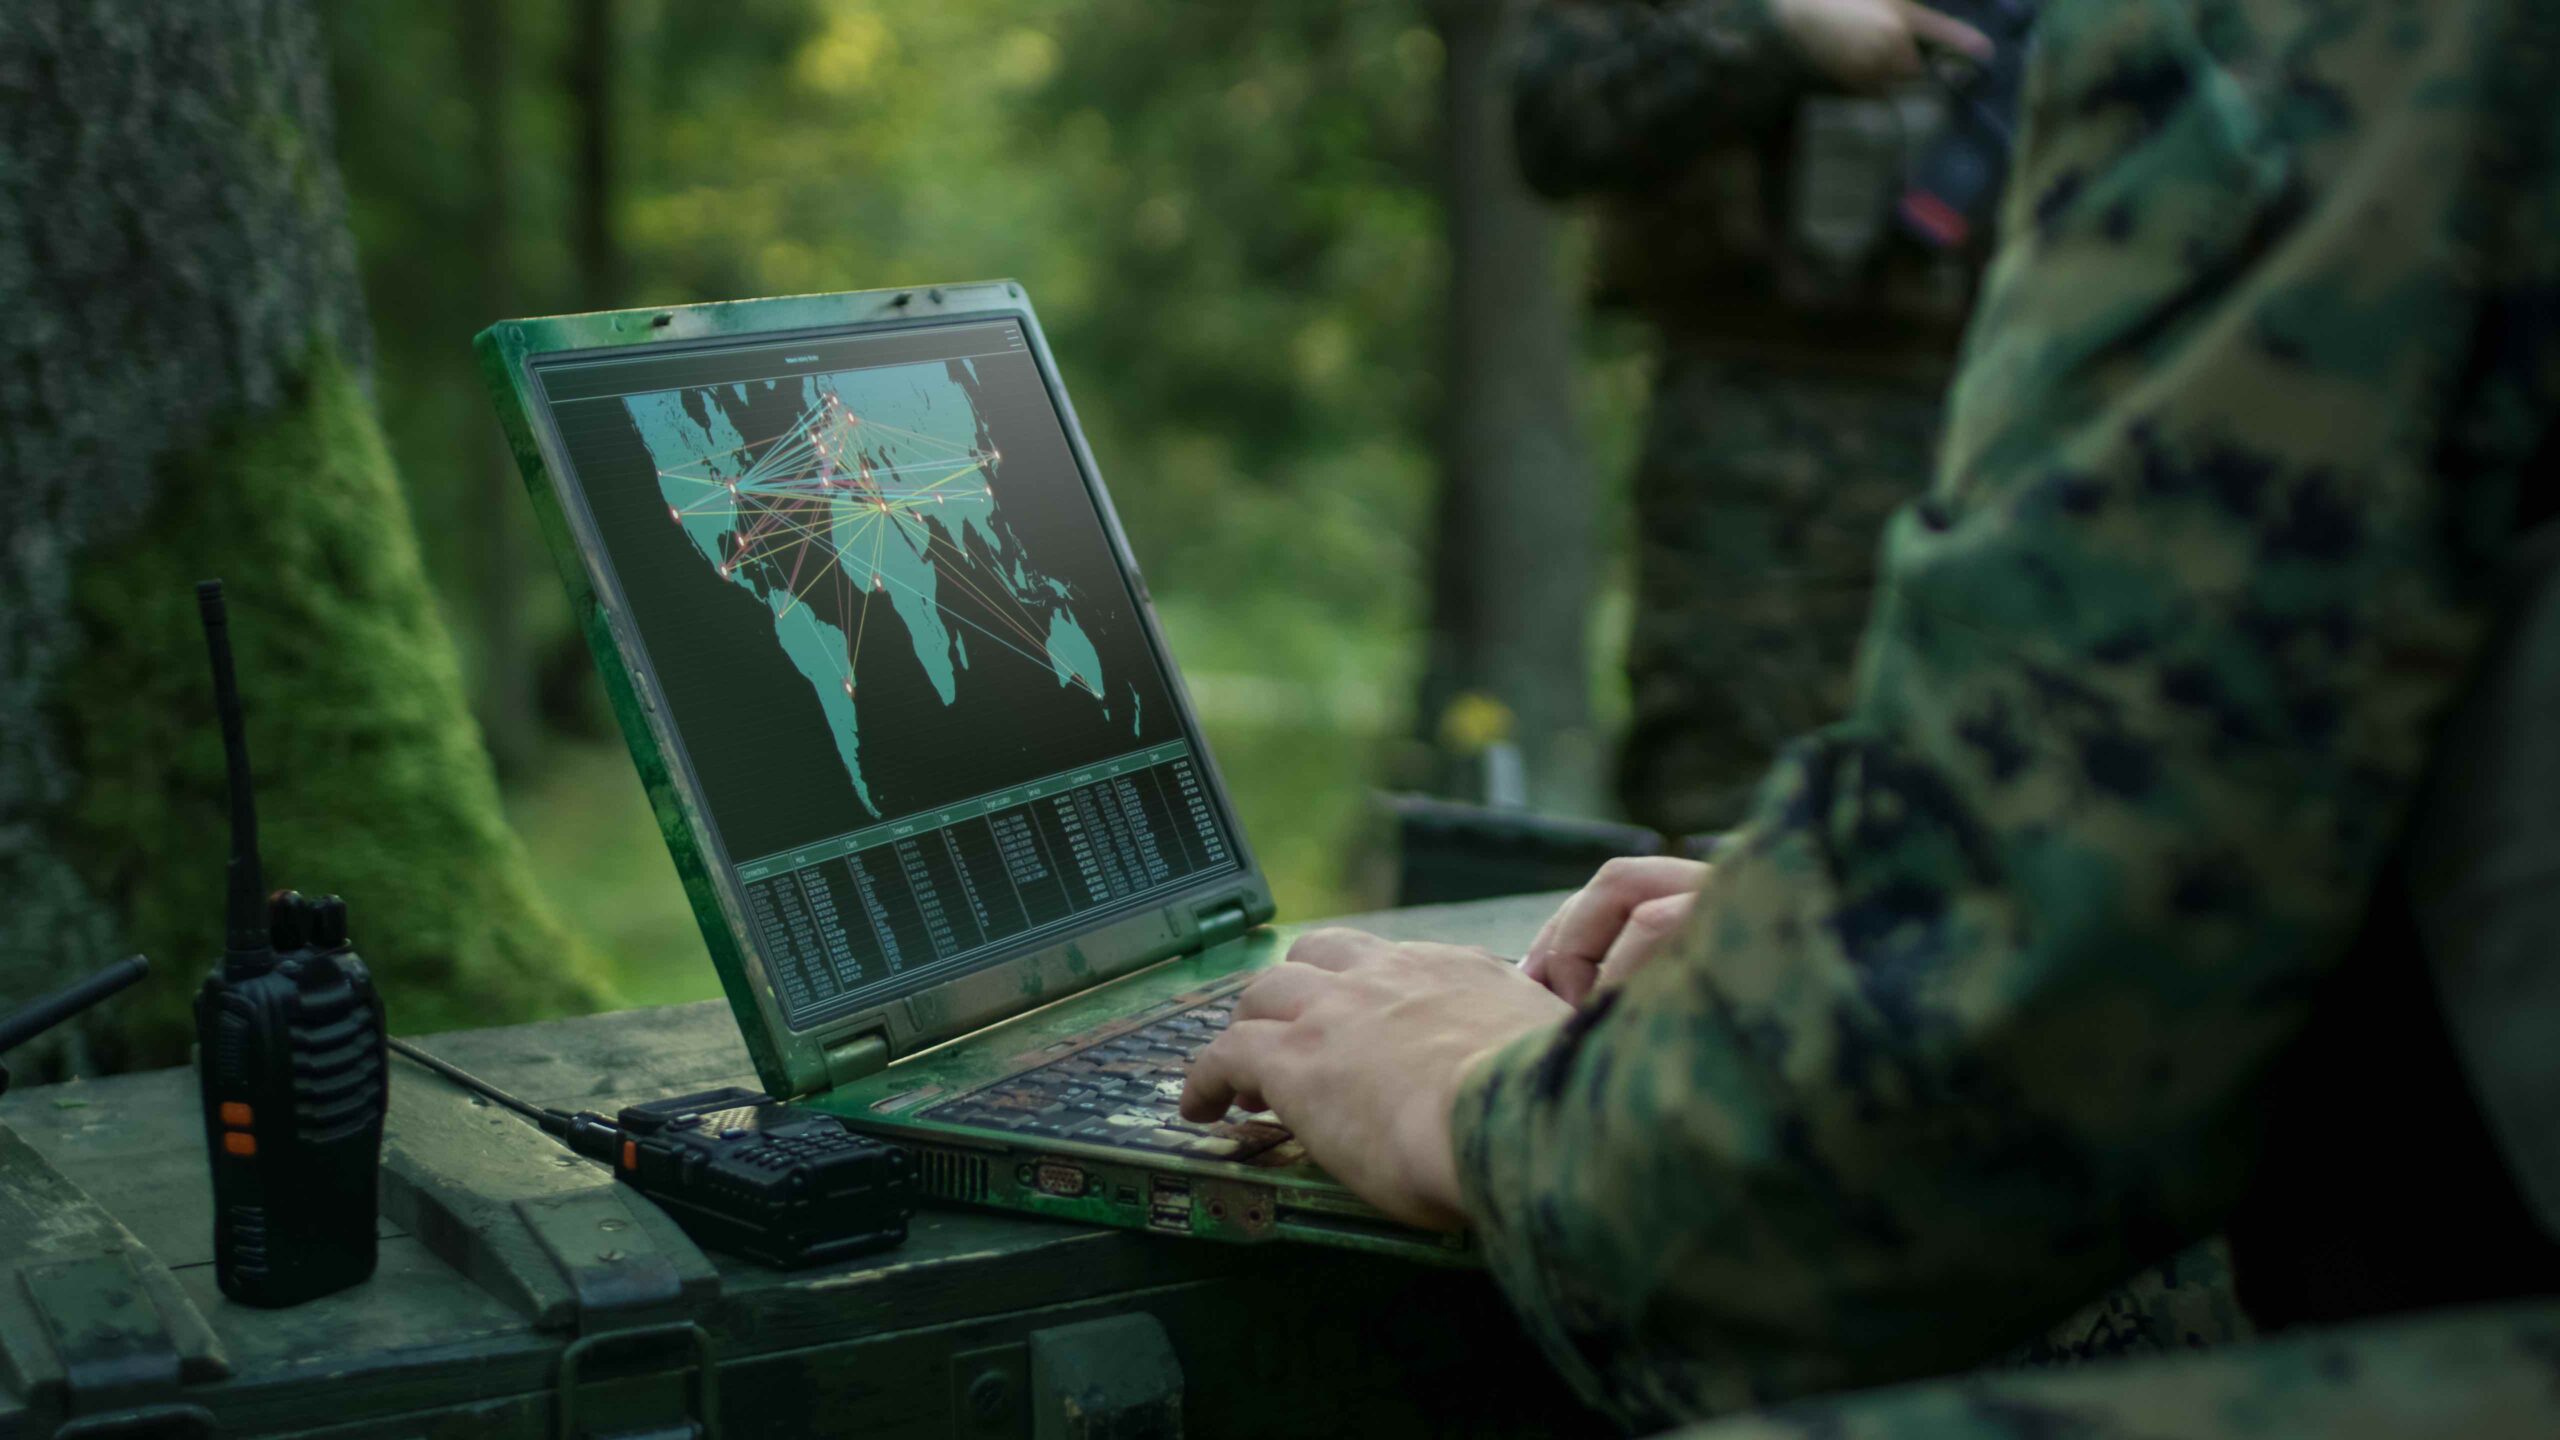 HII’s expertise ranges from building aircraft carriers and developing unmanned systems and advanced C5ISR solutions to conducting full-spectrum cyber operations. (Image courtesy of HII.).